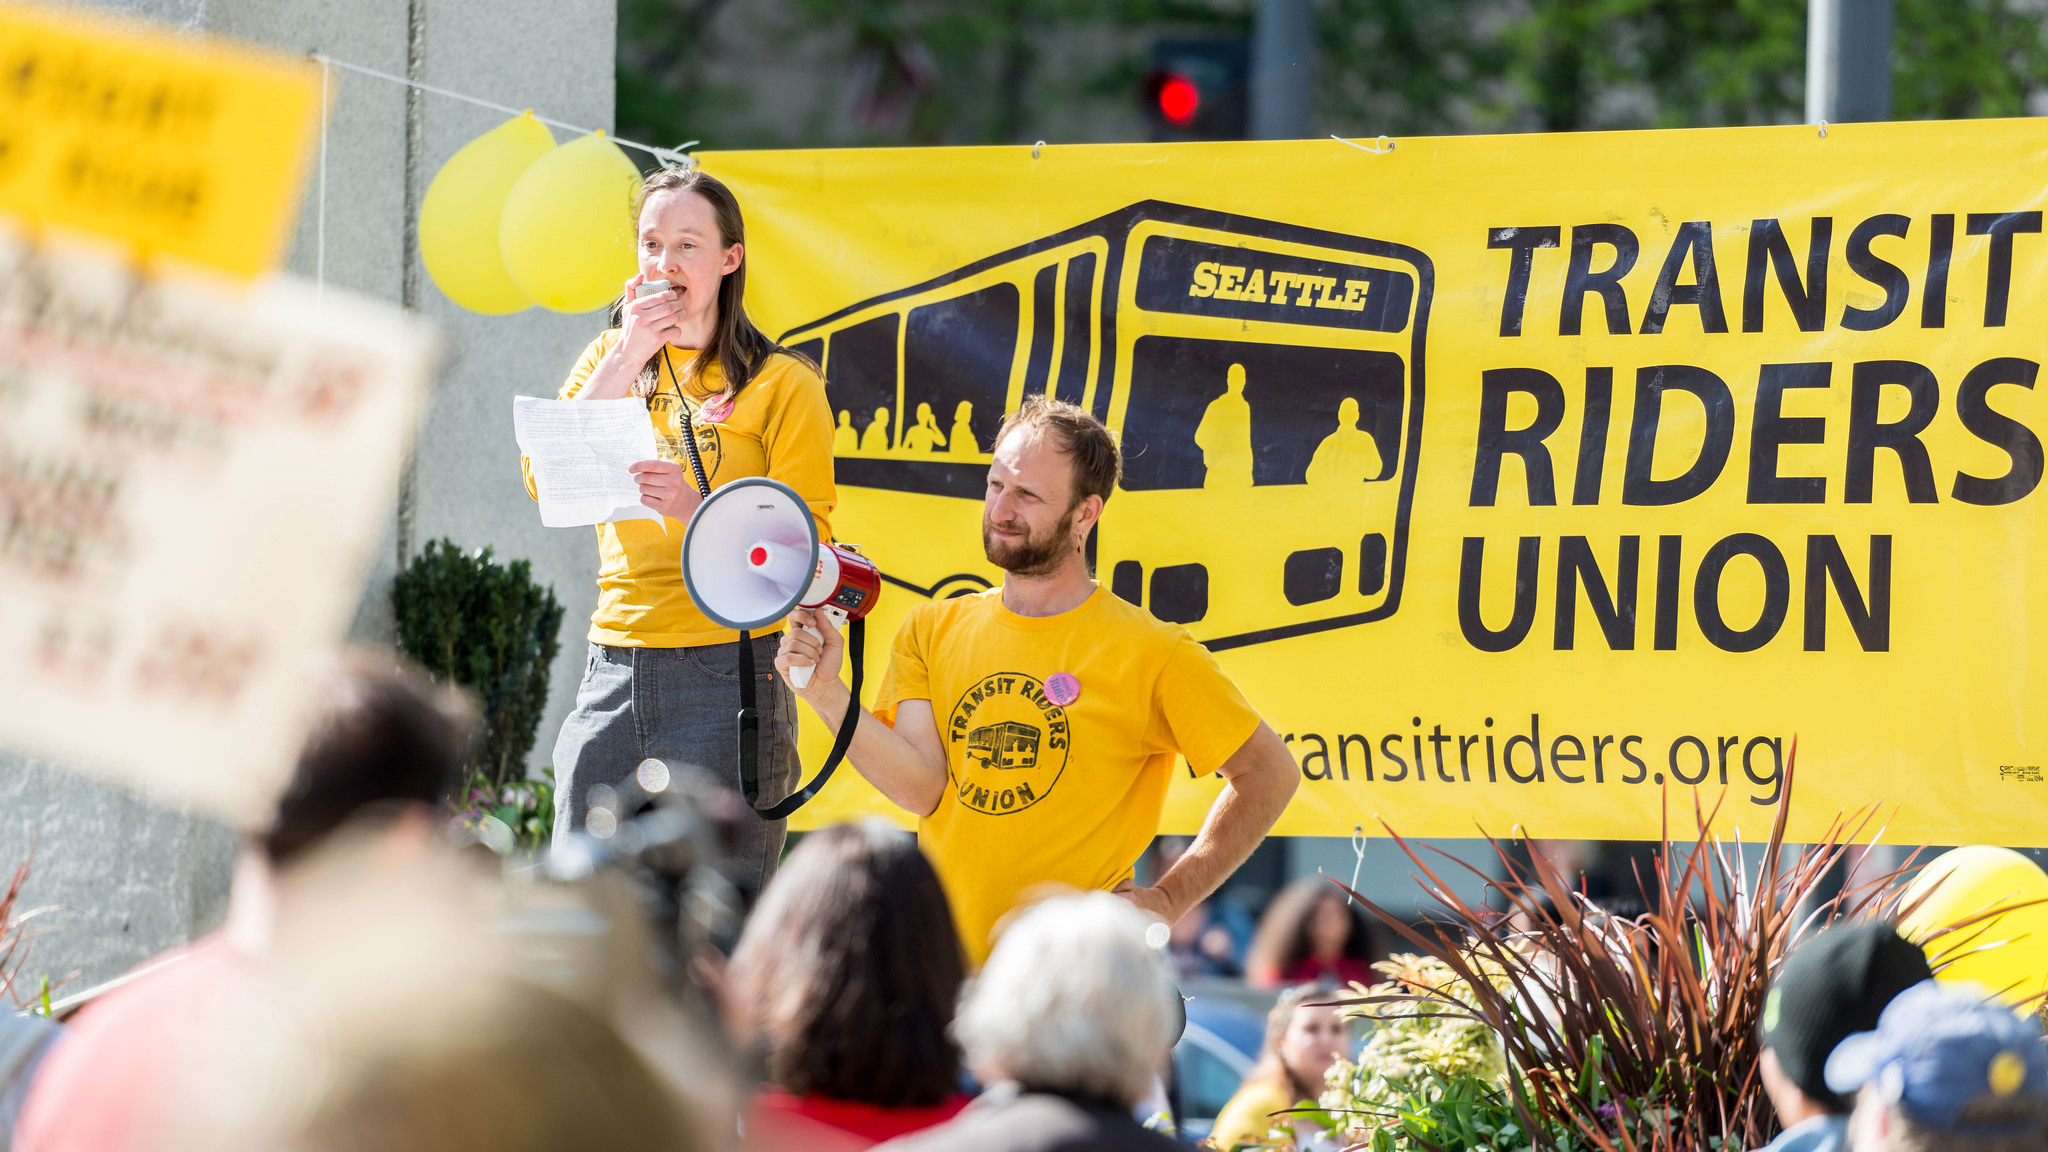 Activists Are Convening for Transit Equity All Over the Country